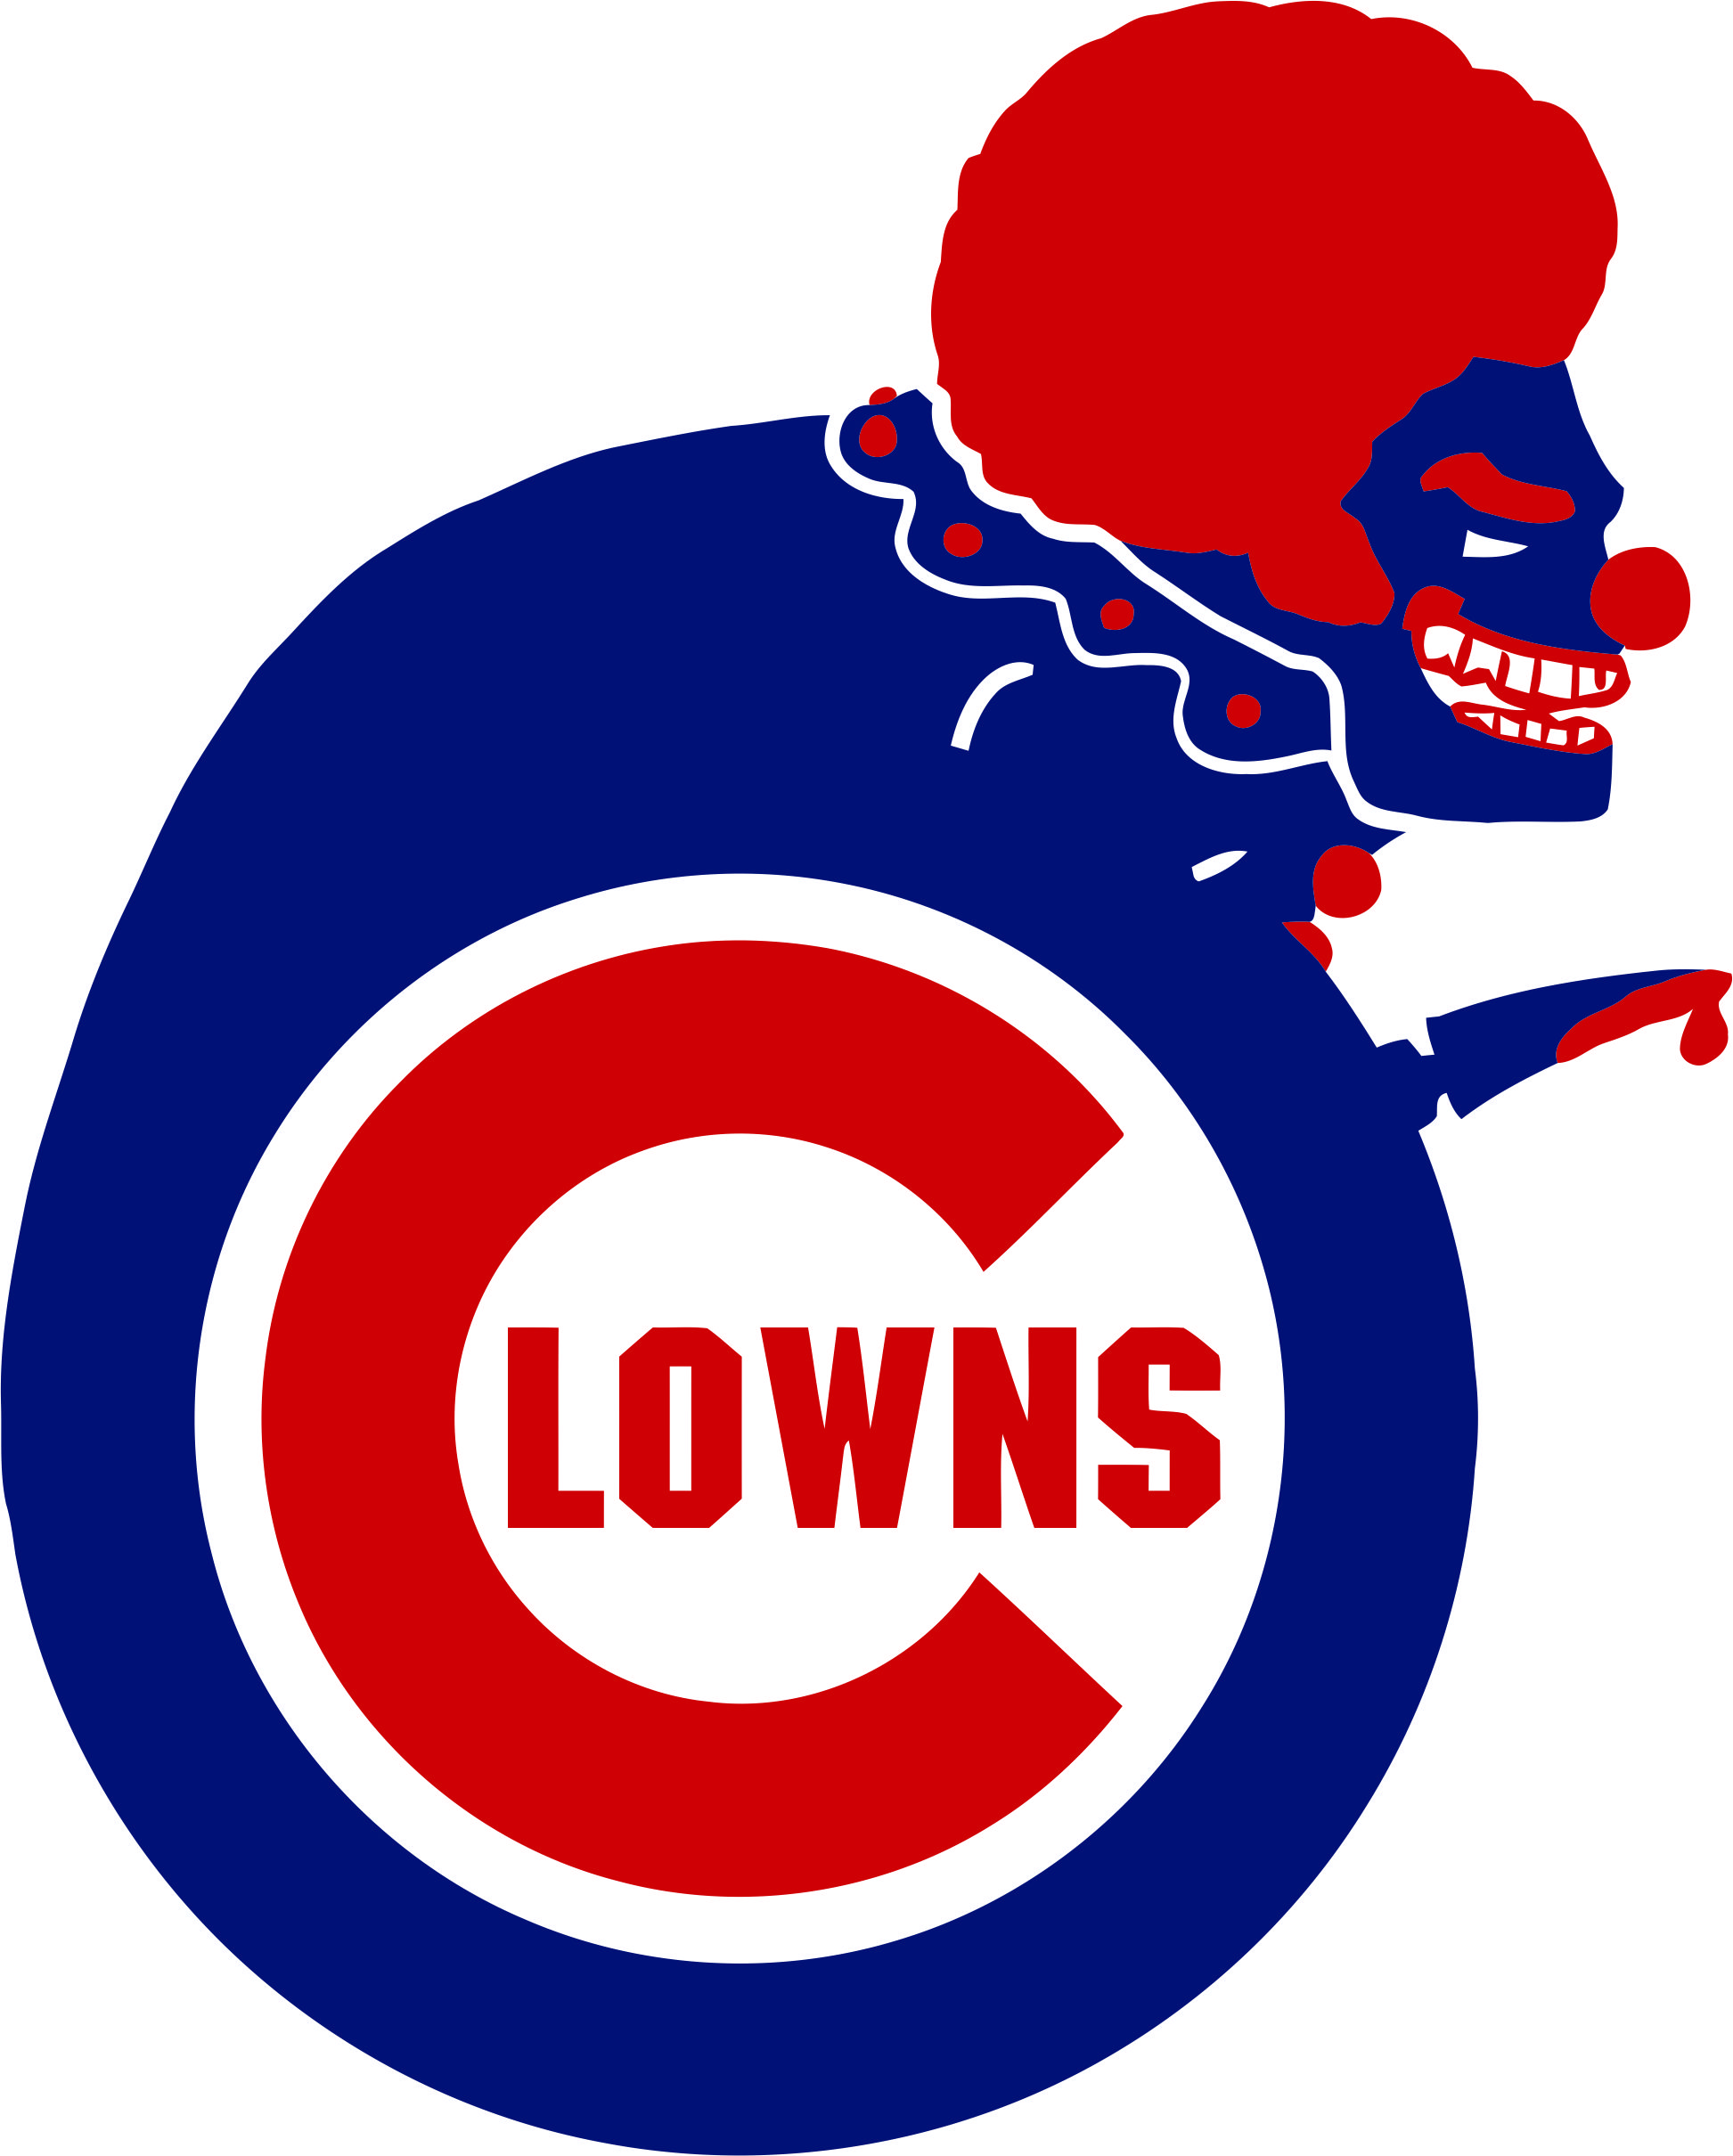 Chicago Cubs Lowns Logo fabric transfer